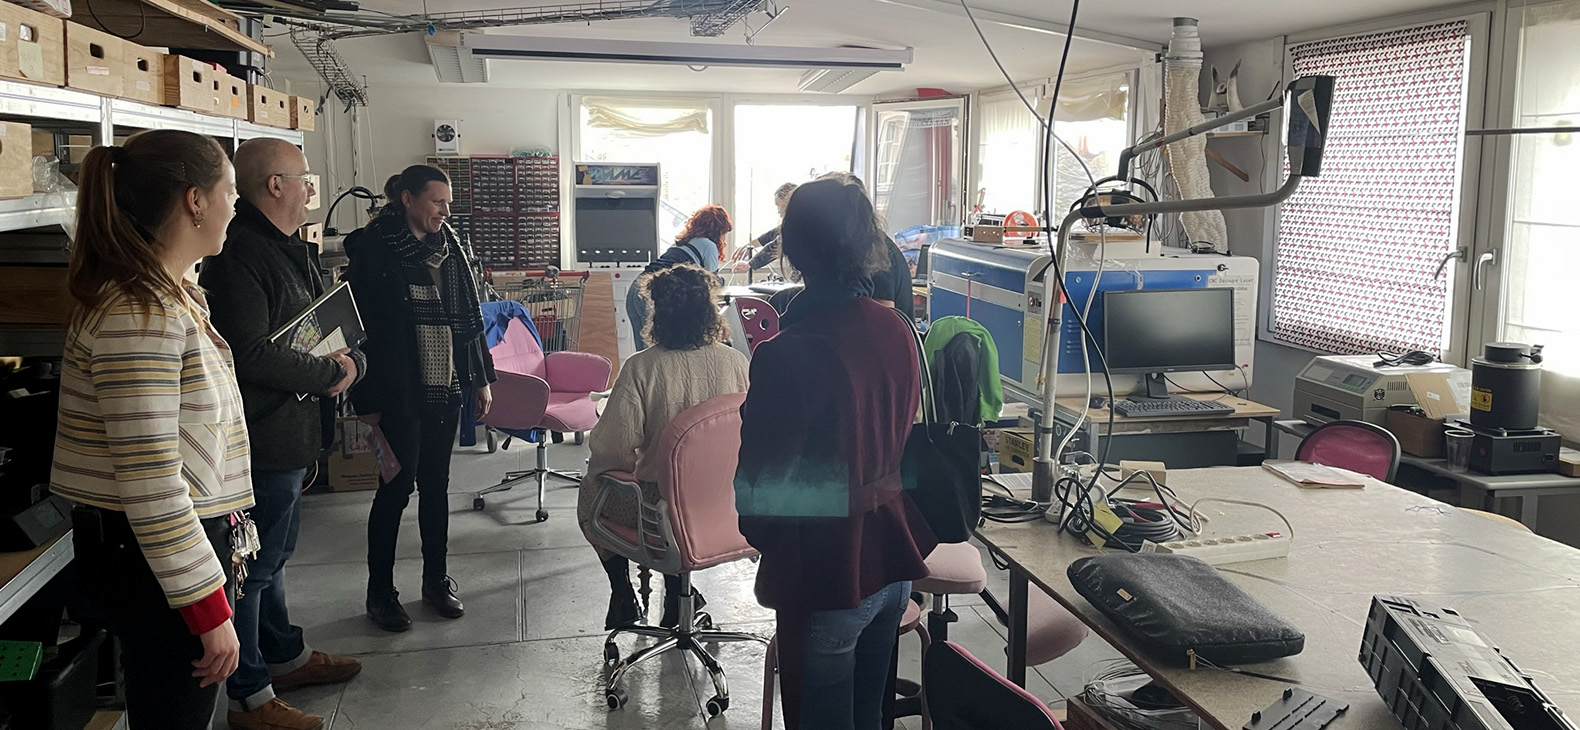 Residency Program Schafhof / District of Upper Bavaria: Focus /> Orléans; Picture: Artist Valérie Leray with seven people in one of the work spaces on site in Orléans.